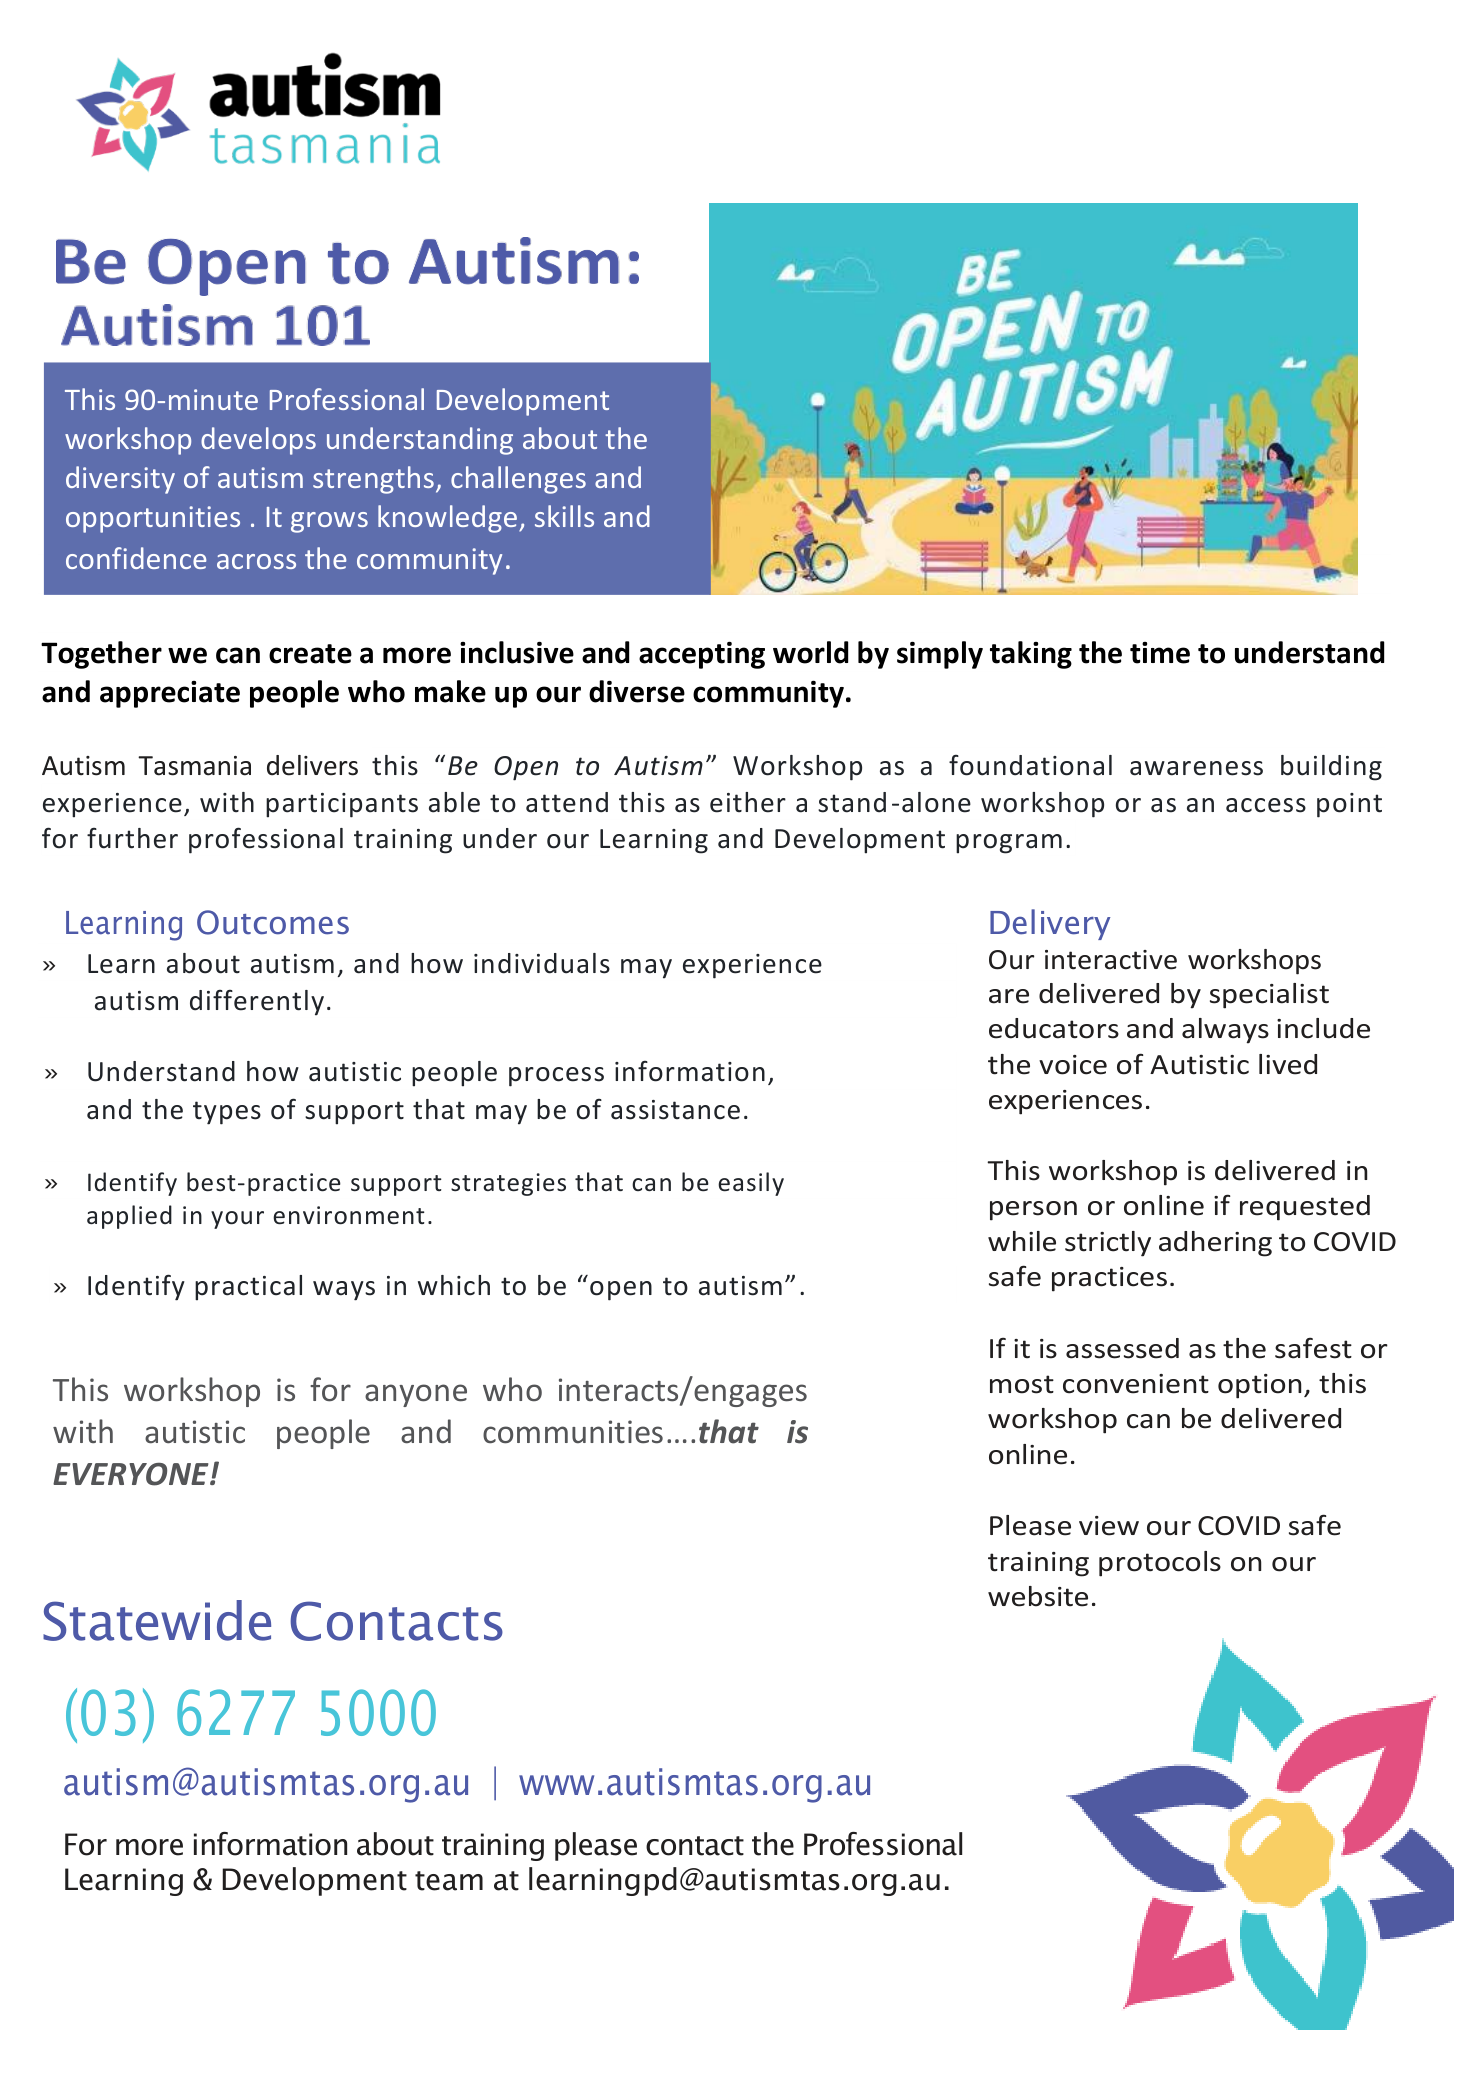 Be Open To Autism 101 Flyer